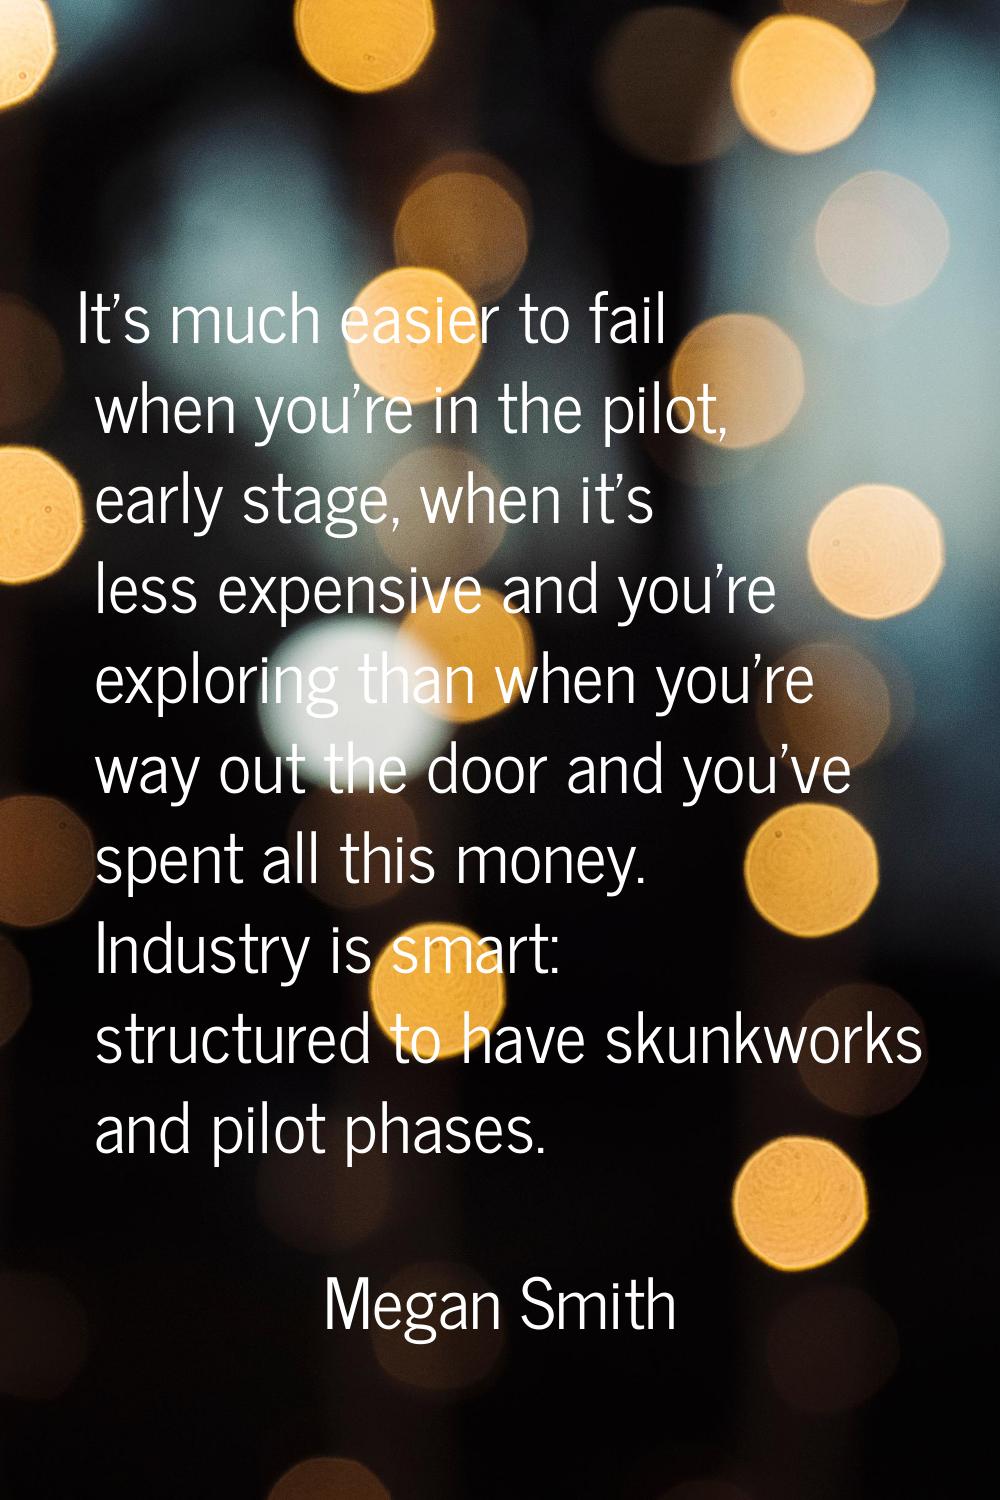 It's much easier to fail when you're in the pilot, early stage, when it's less expensive and you're